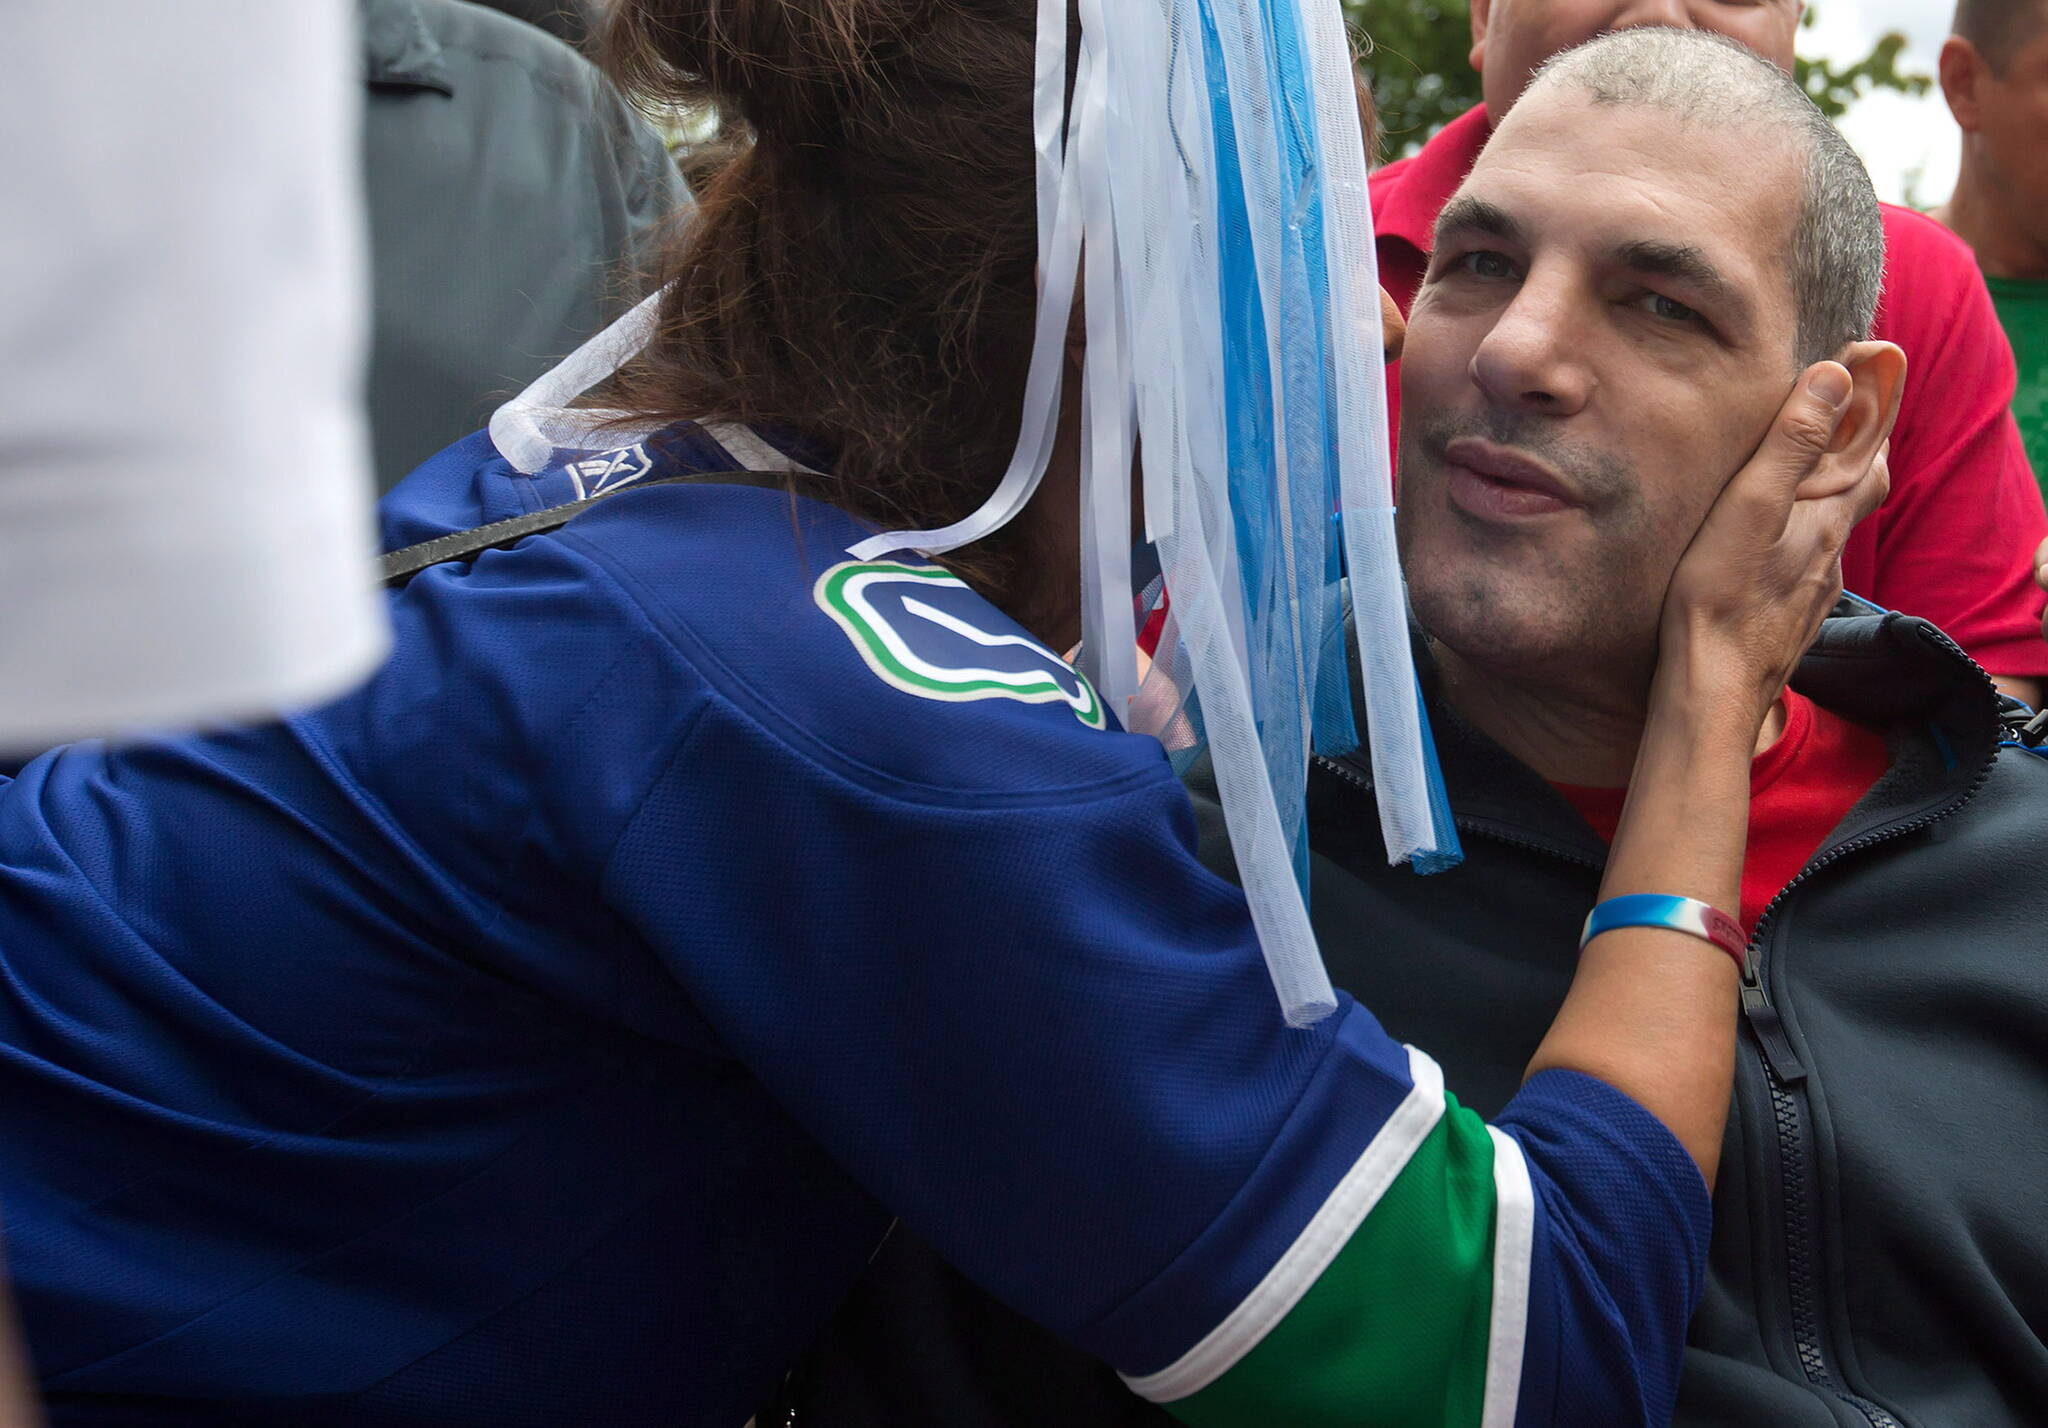 Violet Boehm, left, kisses former Vancouver Canucks’ enforcer Gino Odjick as he’s wheeled back into Vancouver General Hospital after coming out to greet hundreds of fans that gathered to support him in Vancouver, B.C., on Sunday June 29, 2014. THE CANADIAN PRESS/Darryl Dyck